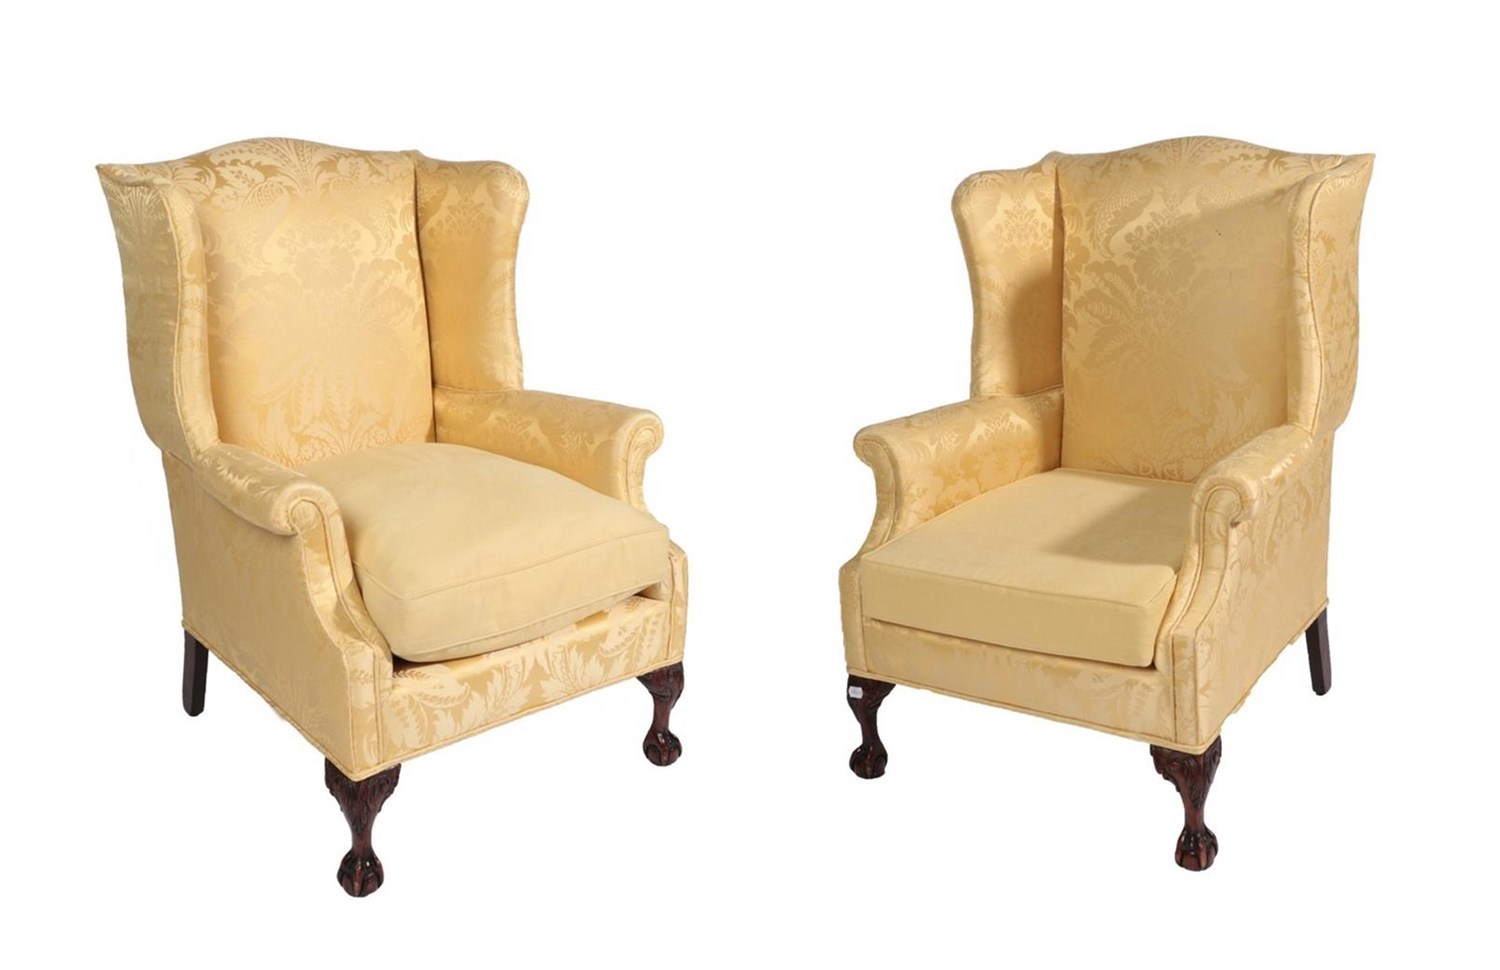 Lot 692 - A Pair of George III Style Wing-Back Armchairs, 20th century, recovered in yellow silk damask, with